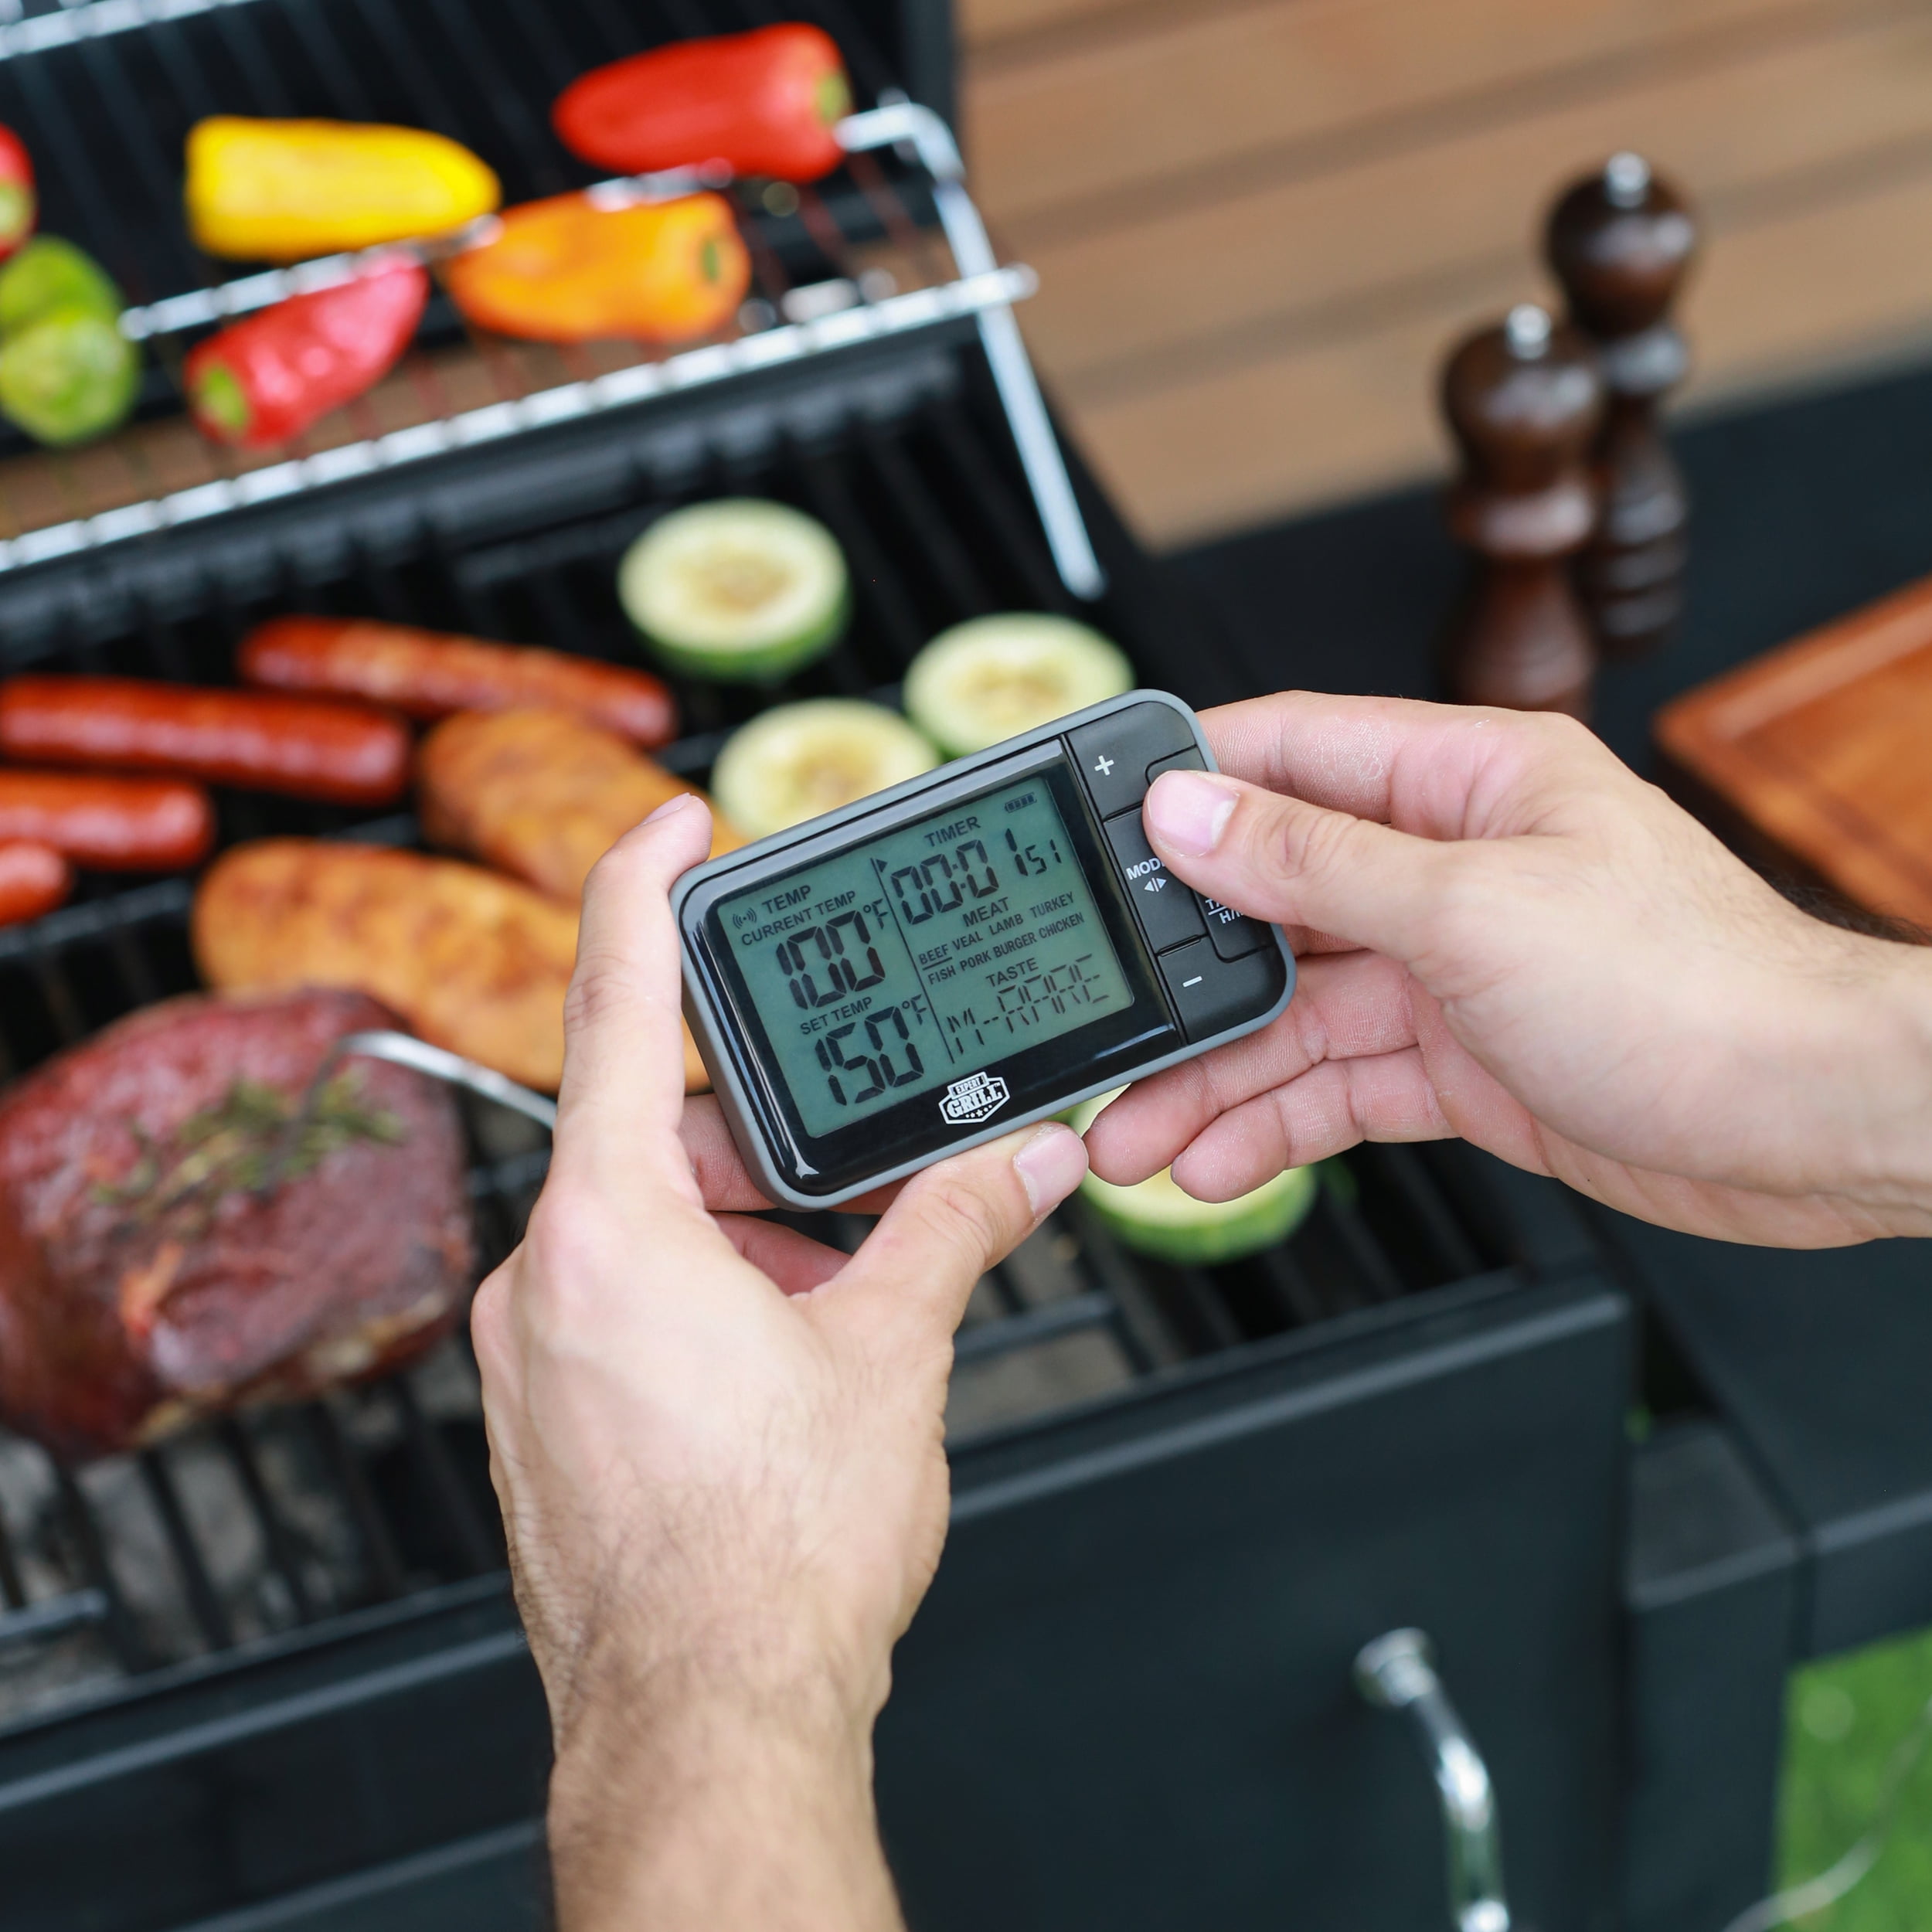  Expert Grill Deluxe Grilling Thermometer : Patio